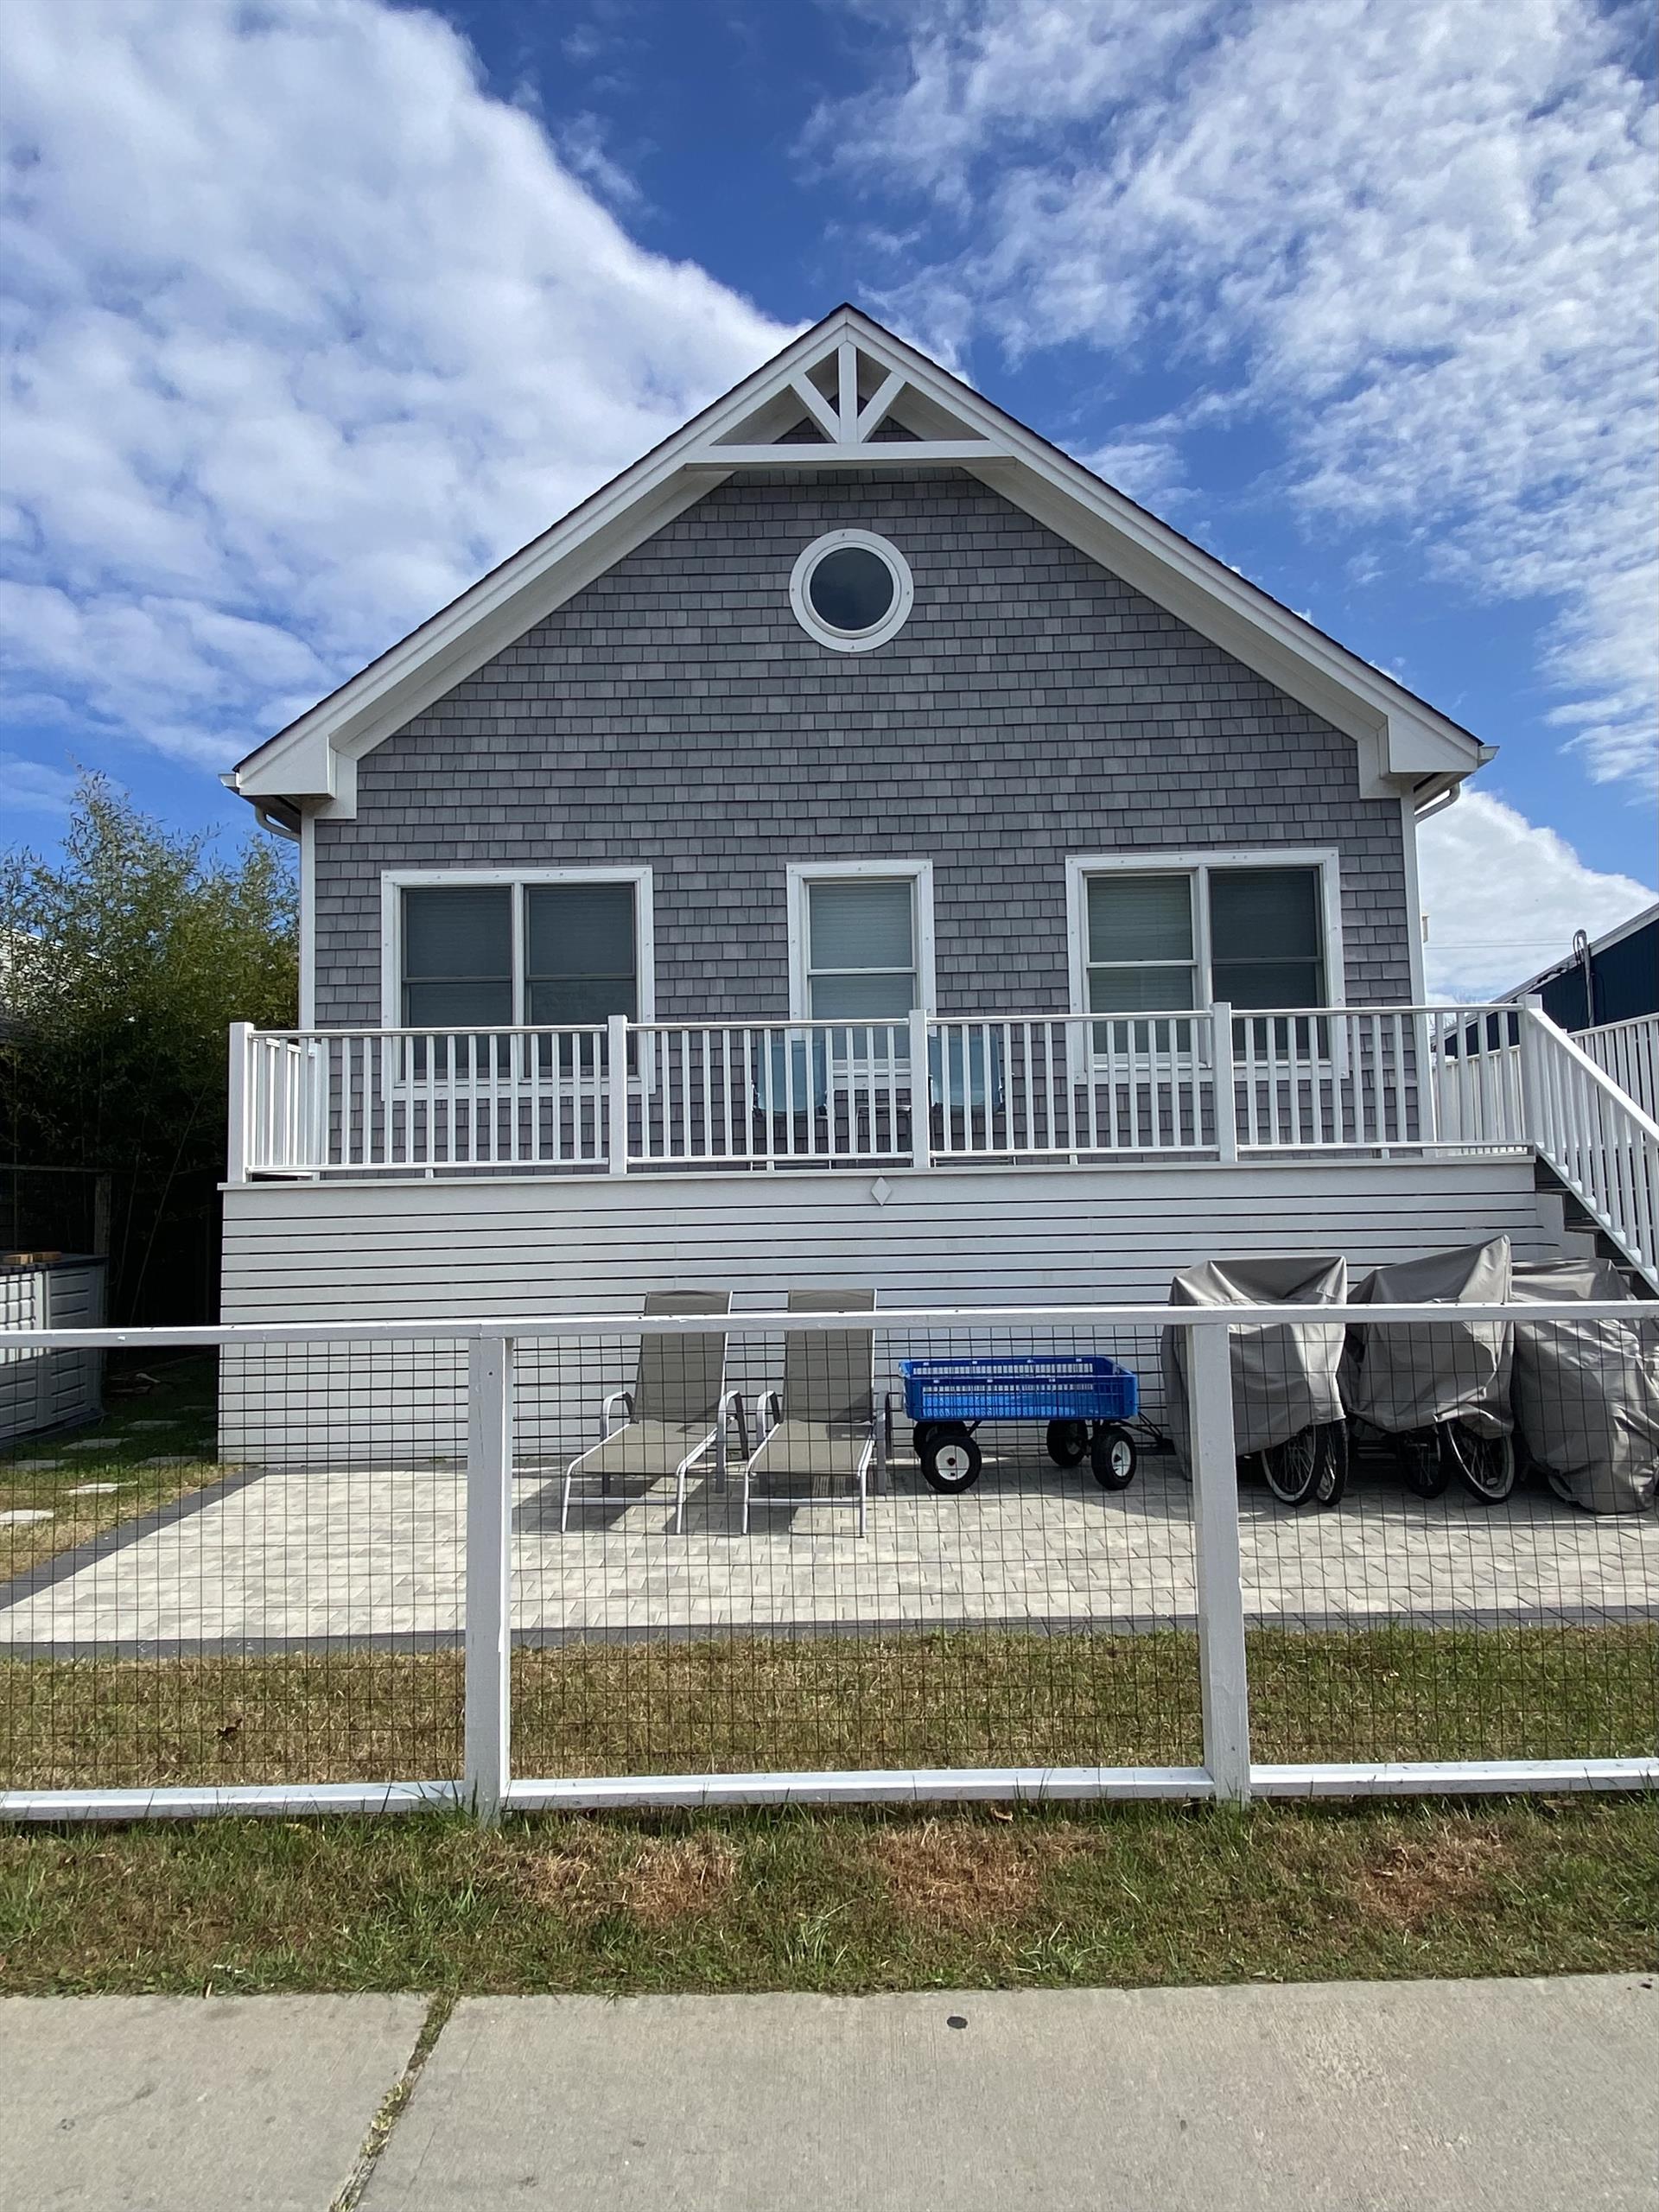 Welcome to your slice of paradise in Ocean Beach, Fire Island! This charming 4-bedroom, 2-bathroom house offers the perfect blend of comfort and convenience, just moments away from the heart of town.
<br> 
Step inside to discover an inviting open-concept living room and kitchen area, perfect for gathering with friends and family. The bright and airy space is ideal for relaxing after a day at the beach or planning your island adventures.
<br>
With four cozy bedrooms, there's plenty of space for everyone to unwind and recharge. Outside, a private deck awaits, offering the perfect spot for enjoying morning coffee or evening cocktails in the sea breeze.
<br>
Conveniently located close to town, you'll have easy access to local shops, restaurants, and attractions, making this the ideal home base for your Fire Island getaway.
<br>
Don't miss out on the opportunity to make unforgettable memories in this charming beach retreat. Book now and start counting down the days until your island escape!